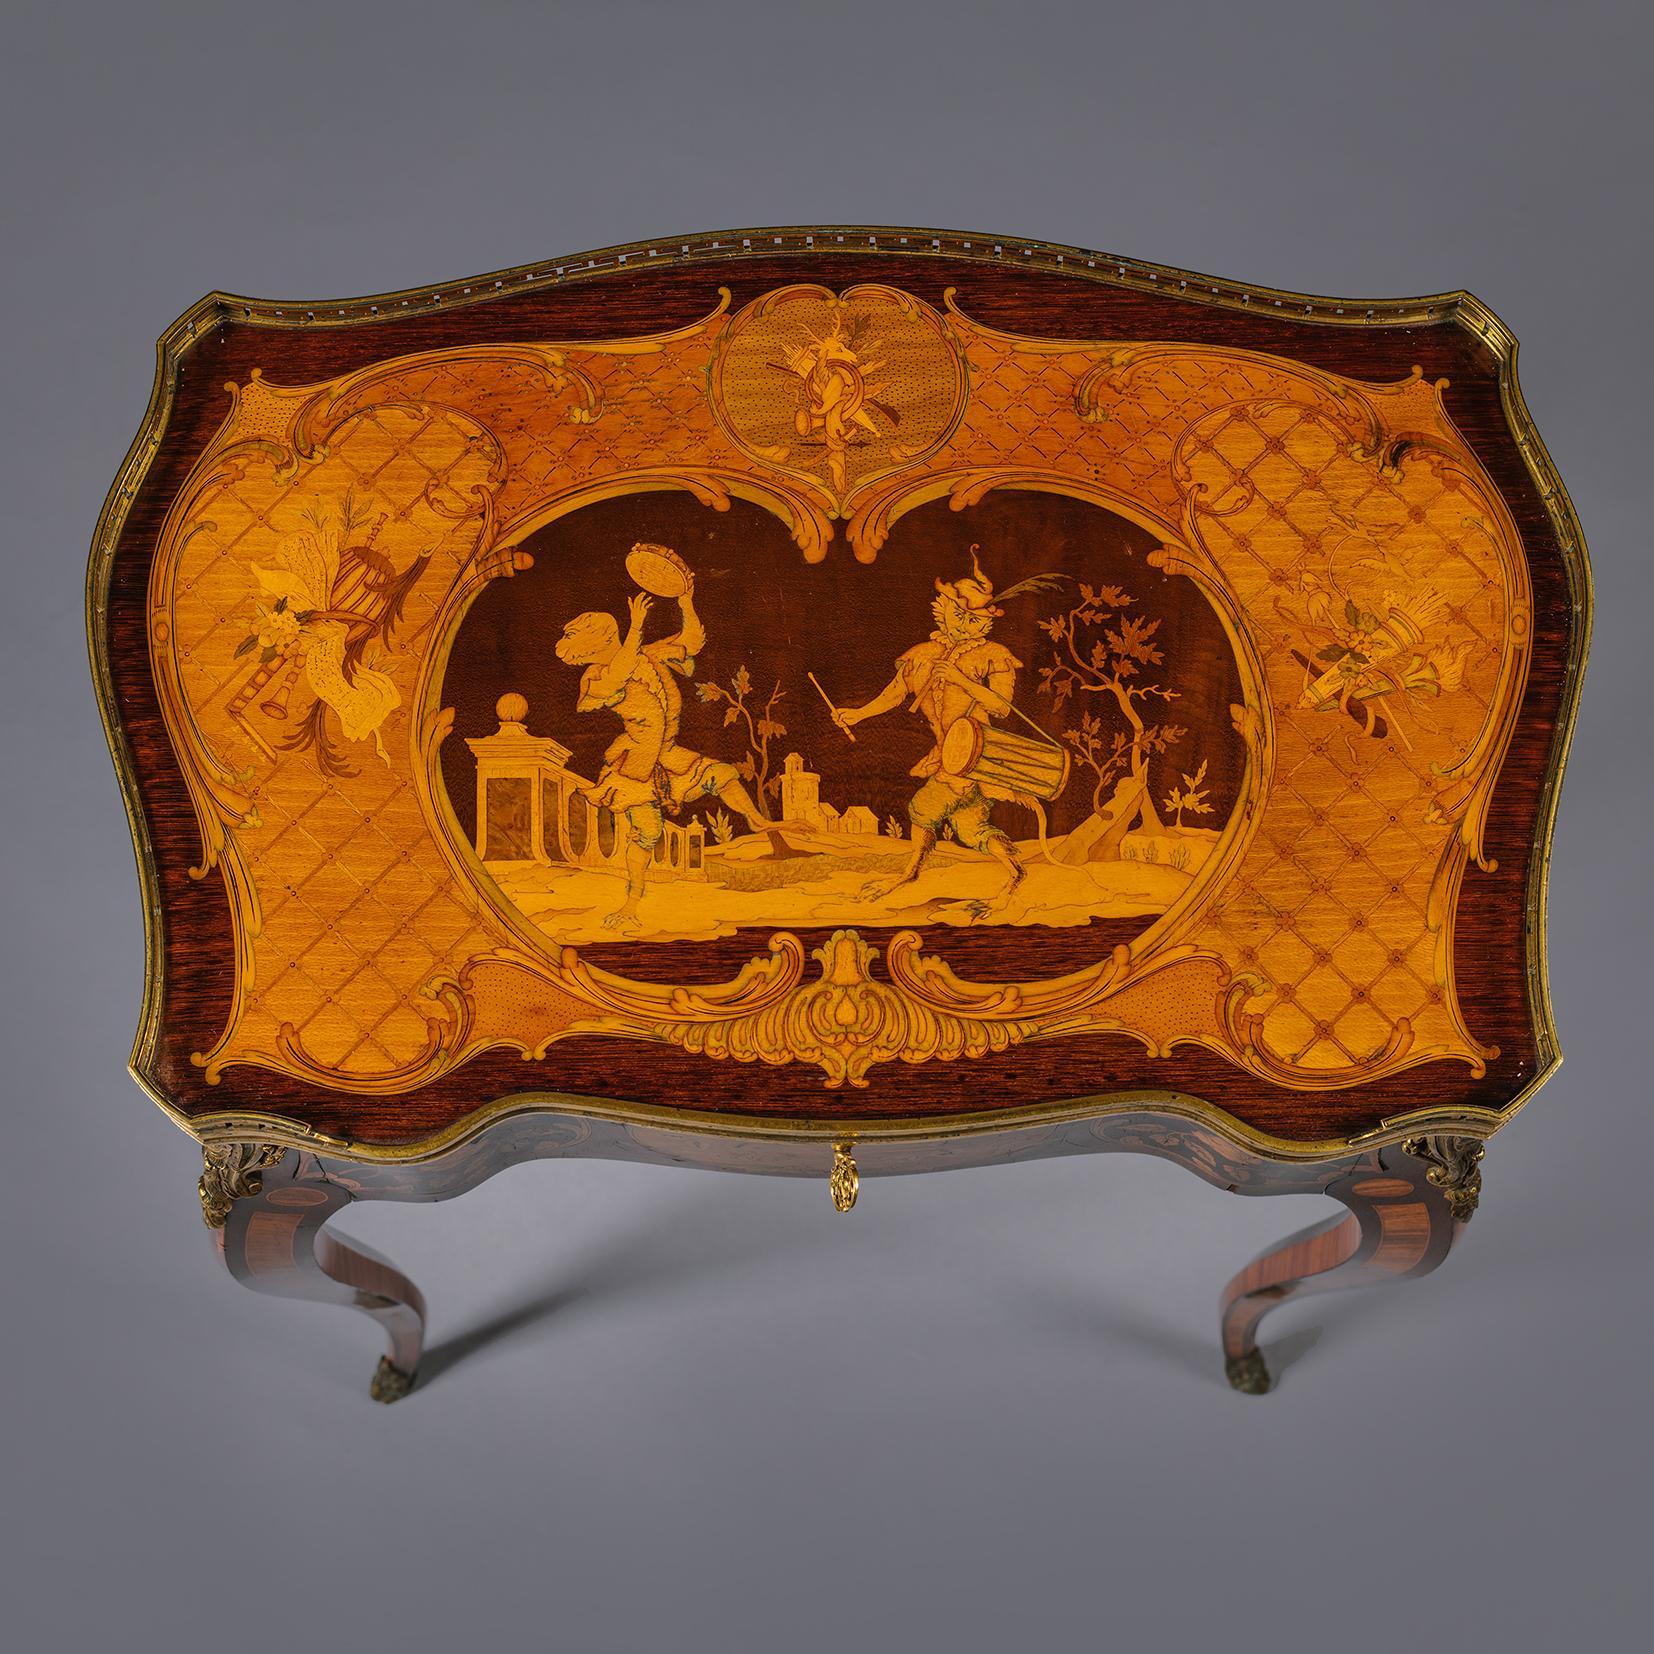 
A Fine and Rare Louis XV Style Gilt-Bronze Mounted Marquetry Occasional Table. By Emmanuel Alfred (dit Alfred II) Beurdeley. Paris. France, Circa 1885.

The top with marquetry of precious fruitwoods and rare timbers depicting a central cartouche of